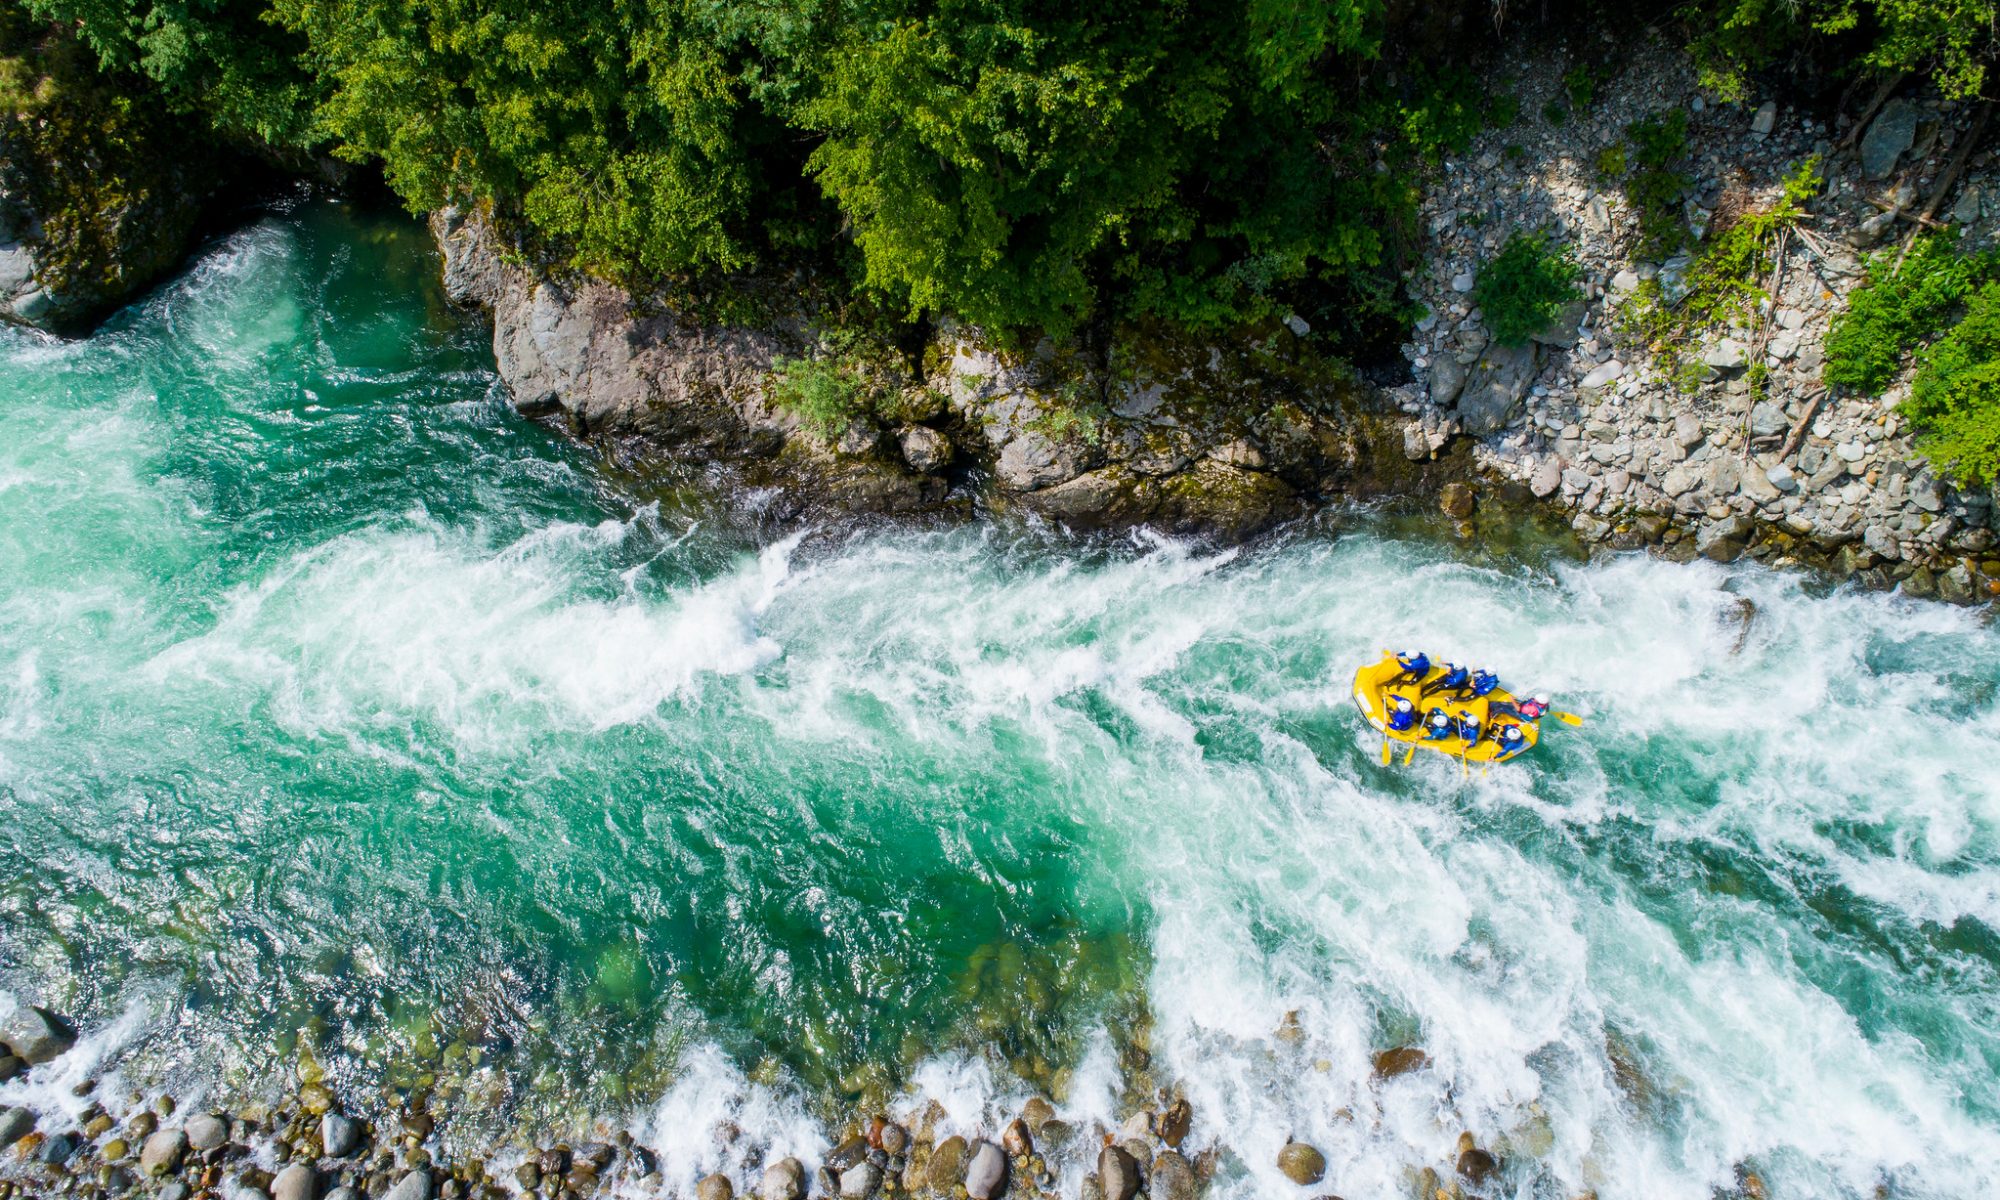 A rafting group tackling rapids on the Sesia River.